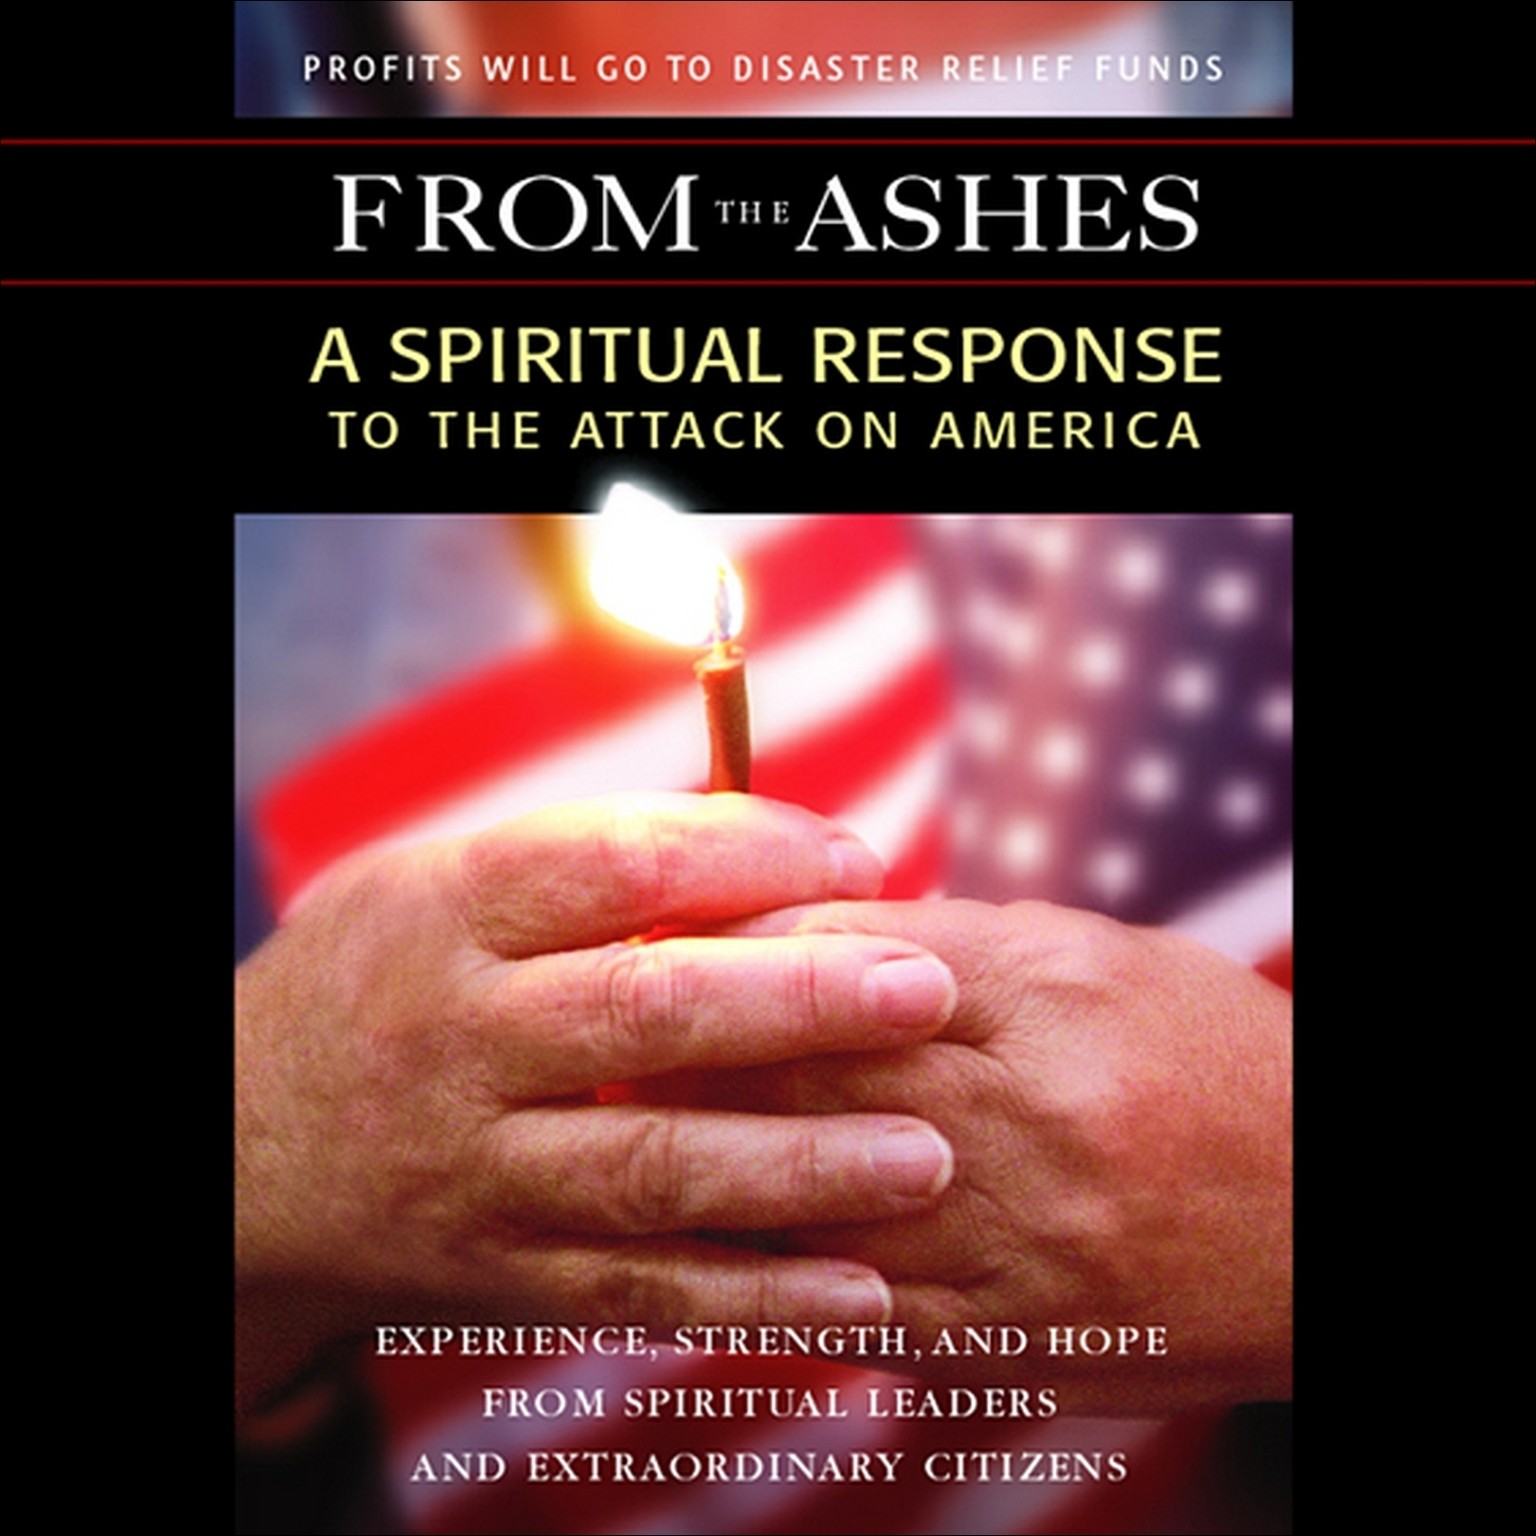 From the Ashes (Abridged): A Spiritual Response to the Attack on America Audiobook, by various authors